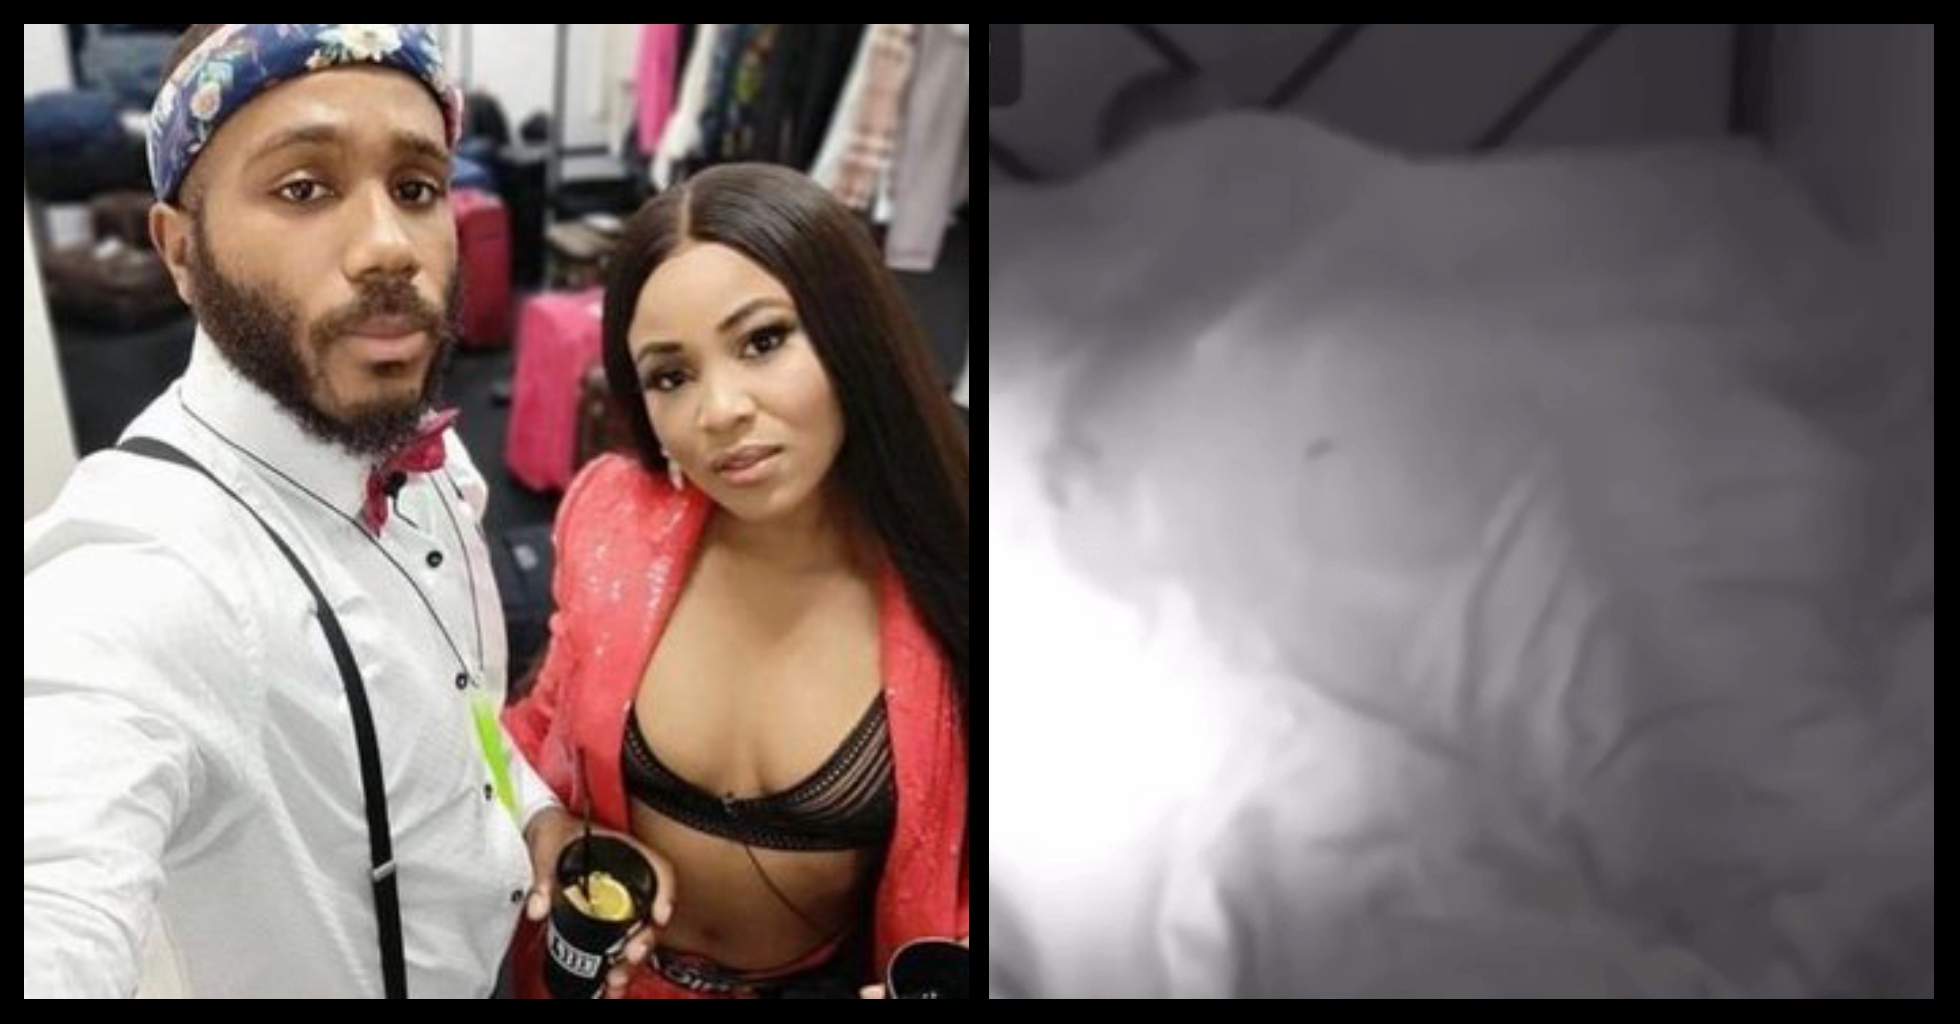 #BBNaija2020: Erica And Kiddwaya Cuddle Aggressively Under The Sheets (Video)